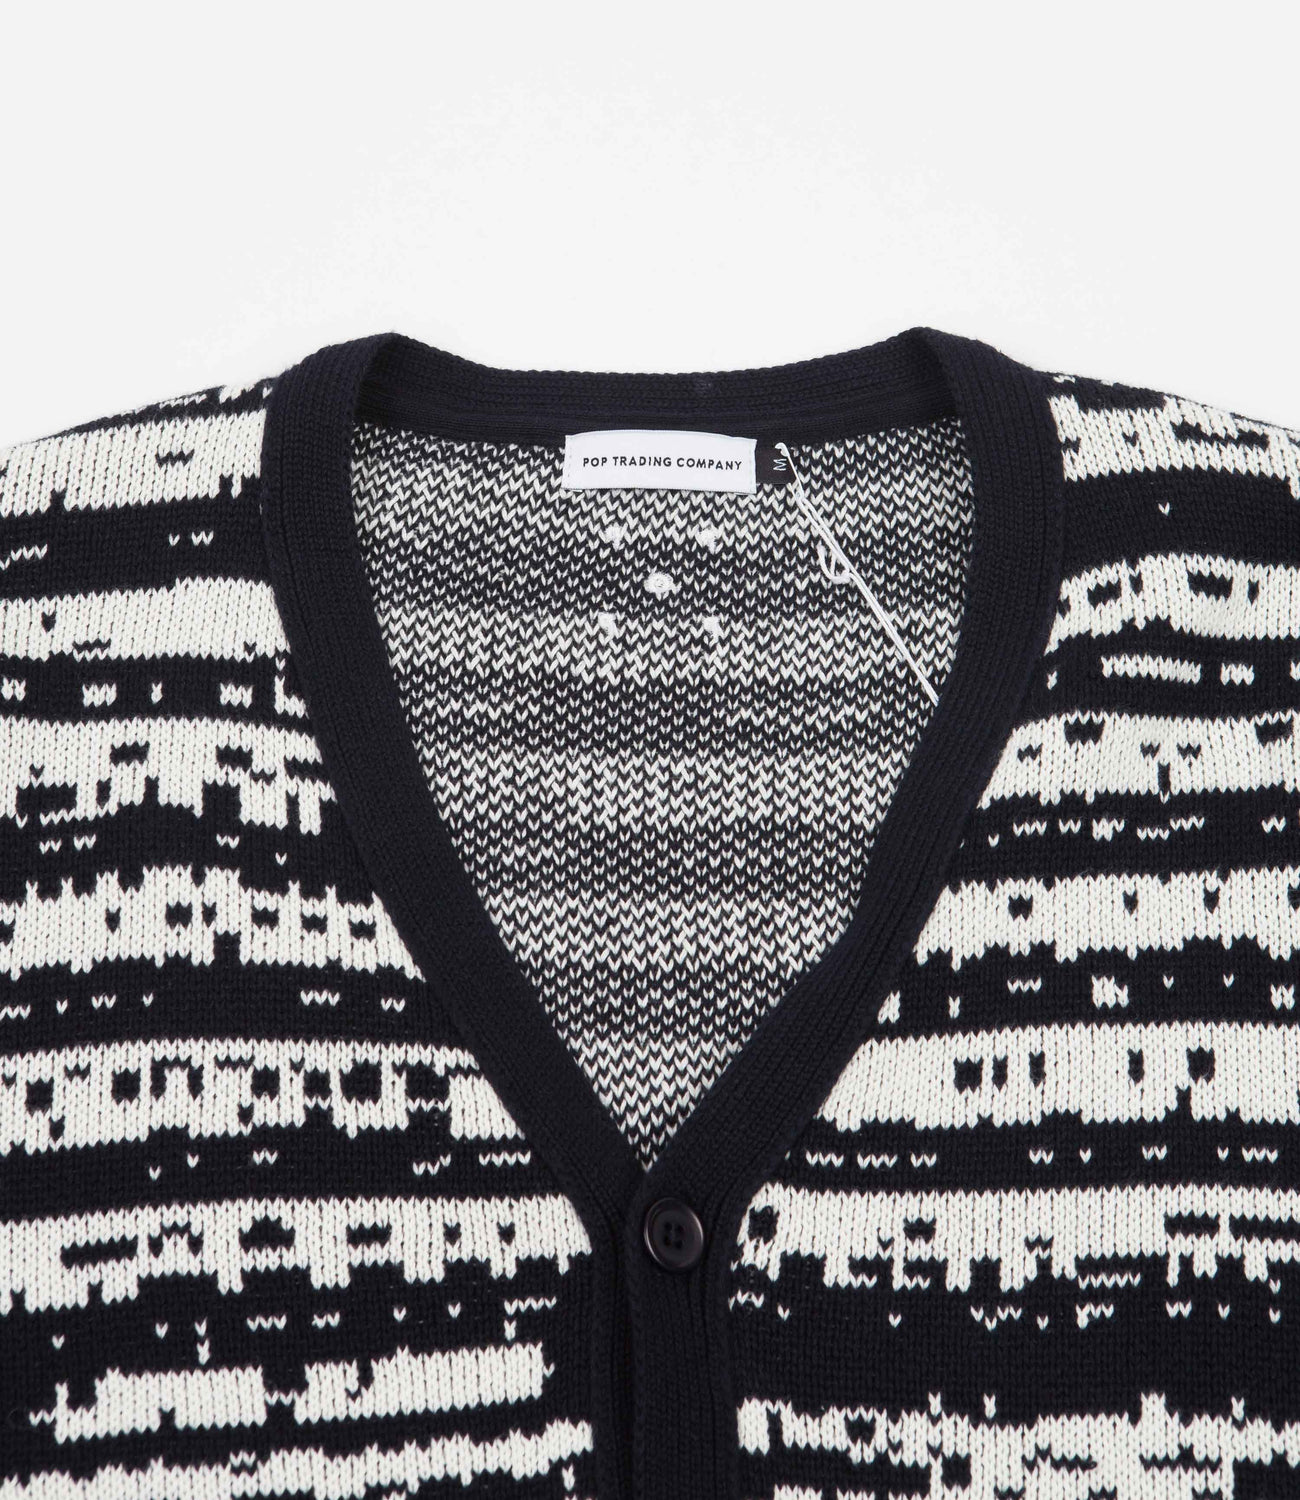 Pop Trading Company x Gilles De Brock Knitted Cardigan - Navy ...